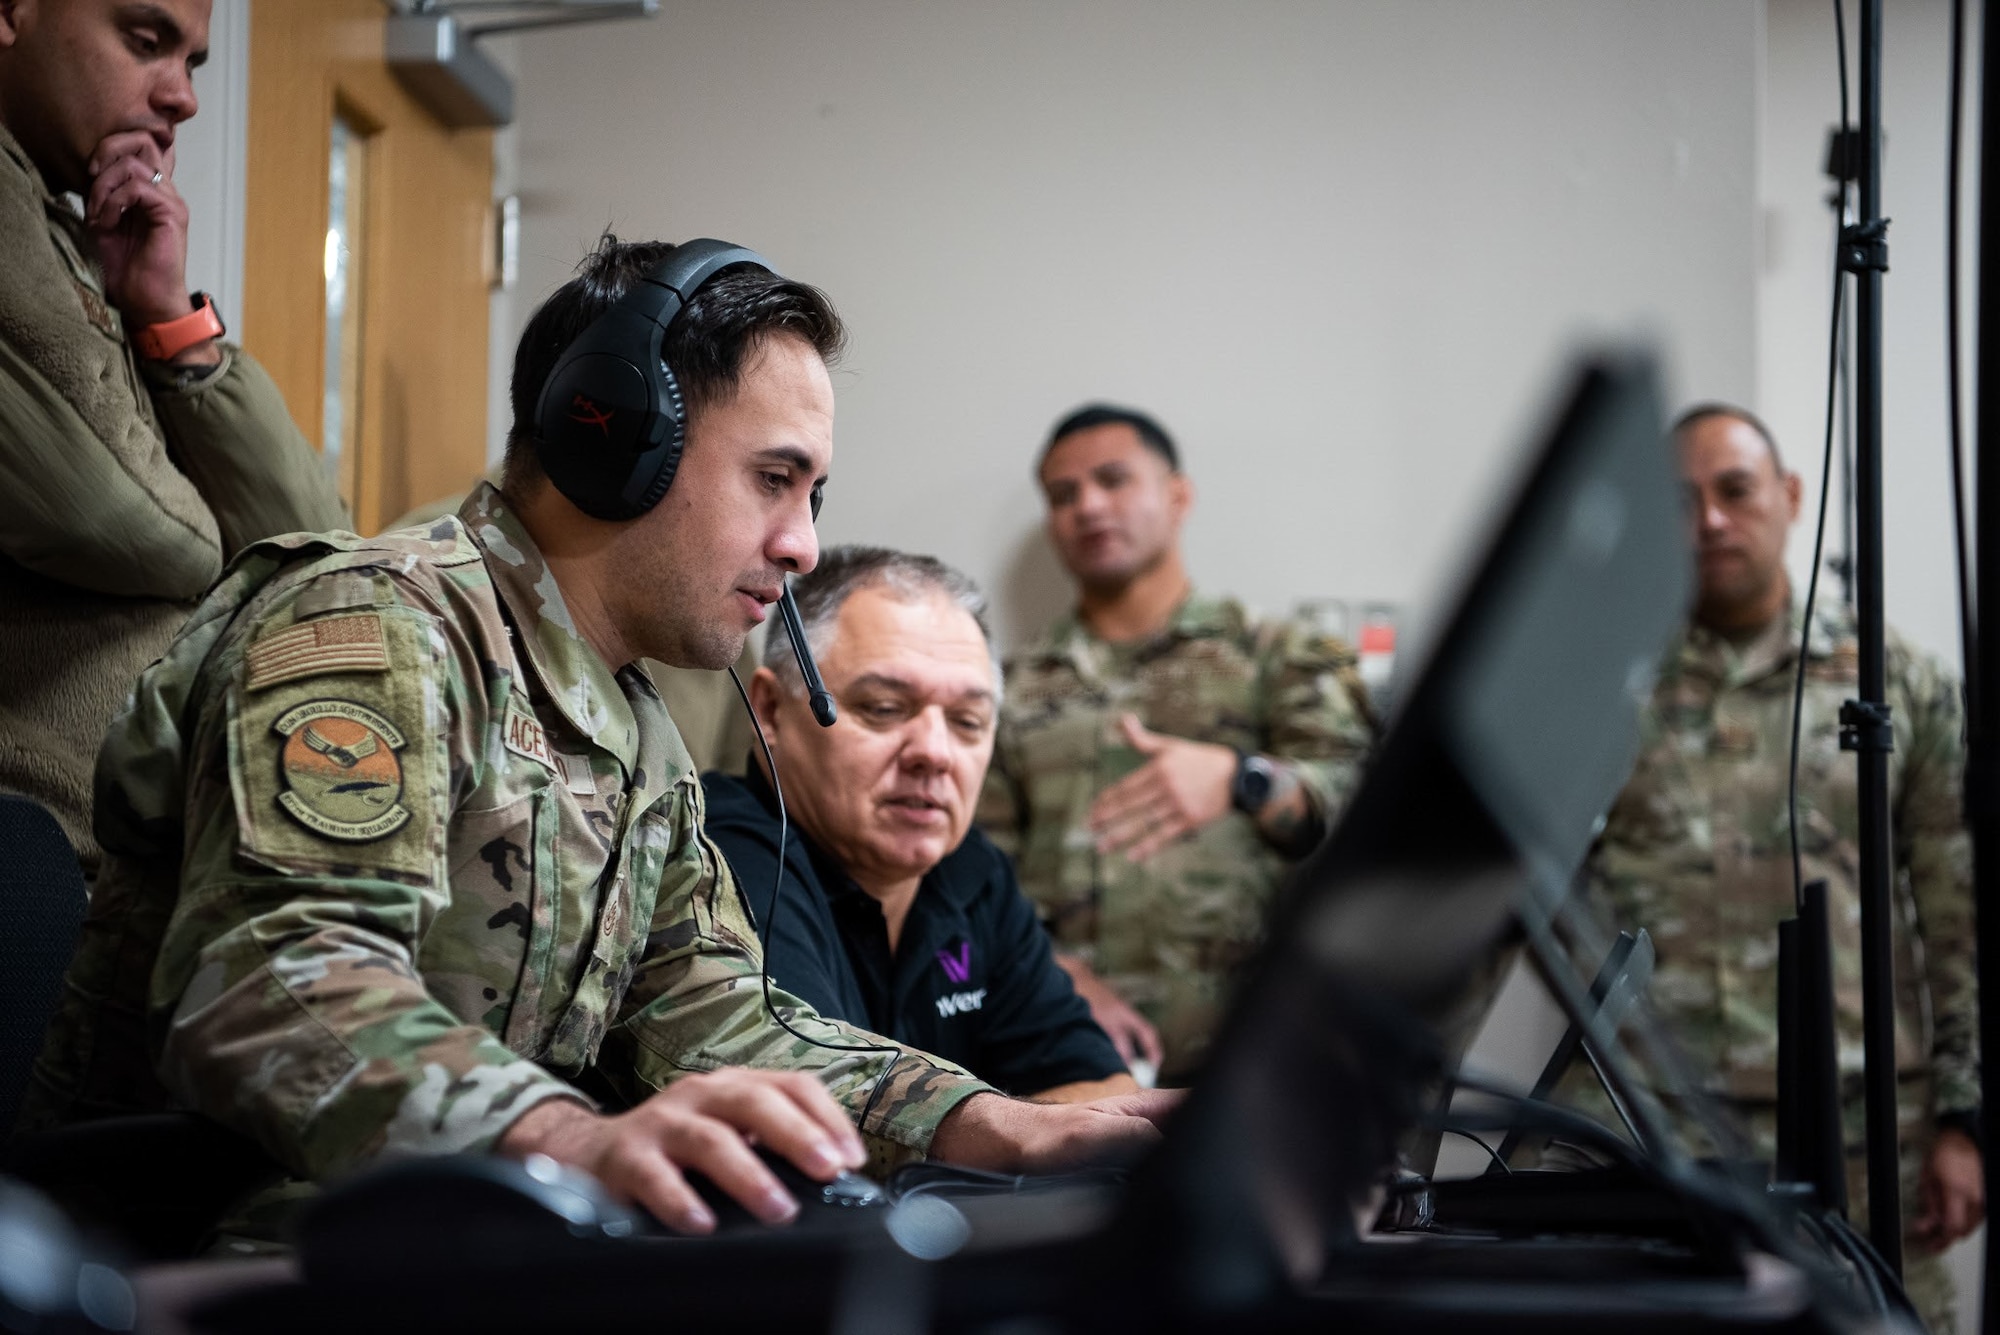 Tech. Sgt. Edwin Acevedo, 837th Training Squadron, looks at the computer screen while using the new SV-R simulator program at the Inter-American Air Forces Academy at Joint Base San Antonio-Lackland, Texas, Jan. 25, 2023. The simulator is among the newest equipment at the academy that will be used to train international military students from partner nations, focusing on counter narcotic efforts and combatting transnational criminal organizations. (U.S. Air Force photo by Vanessa R. Adame)